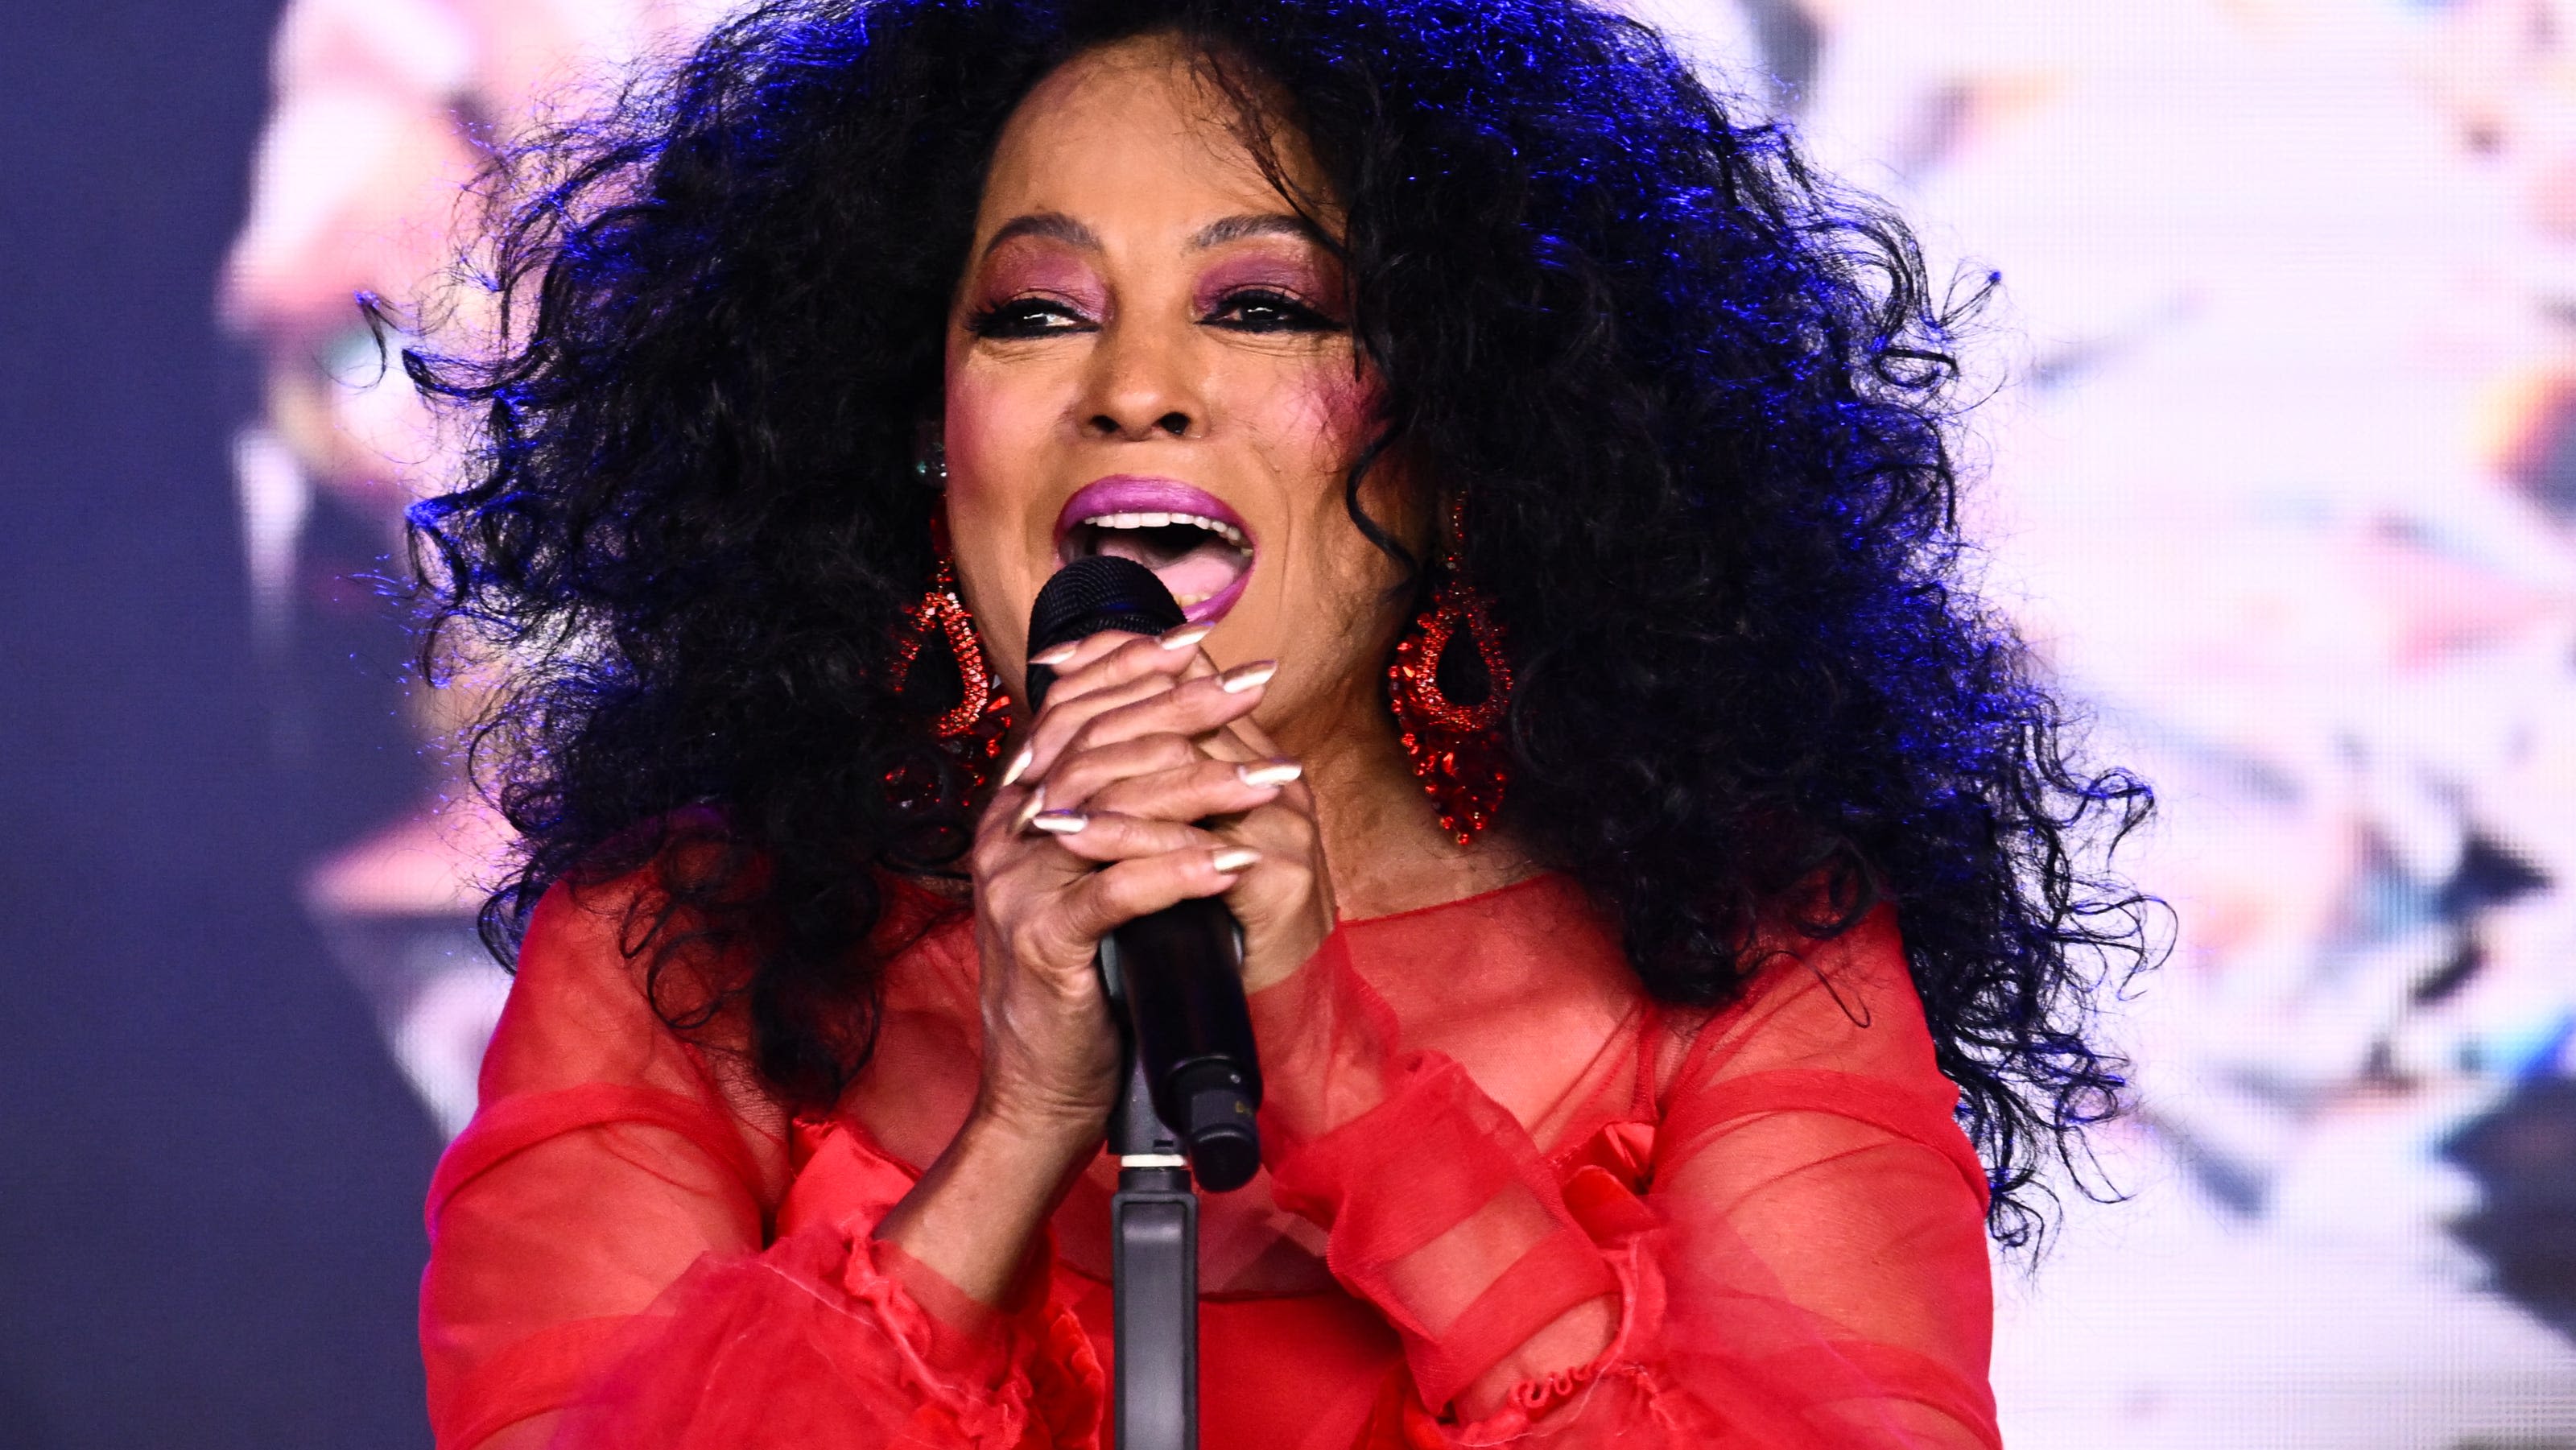 Reno-Tahoe shows, now through August: Diana Ross, E-40, Postmodern Jukebox and 83 more